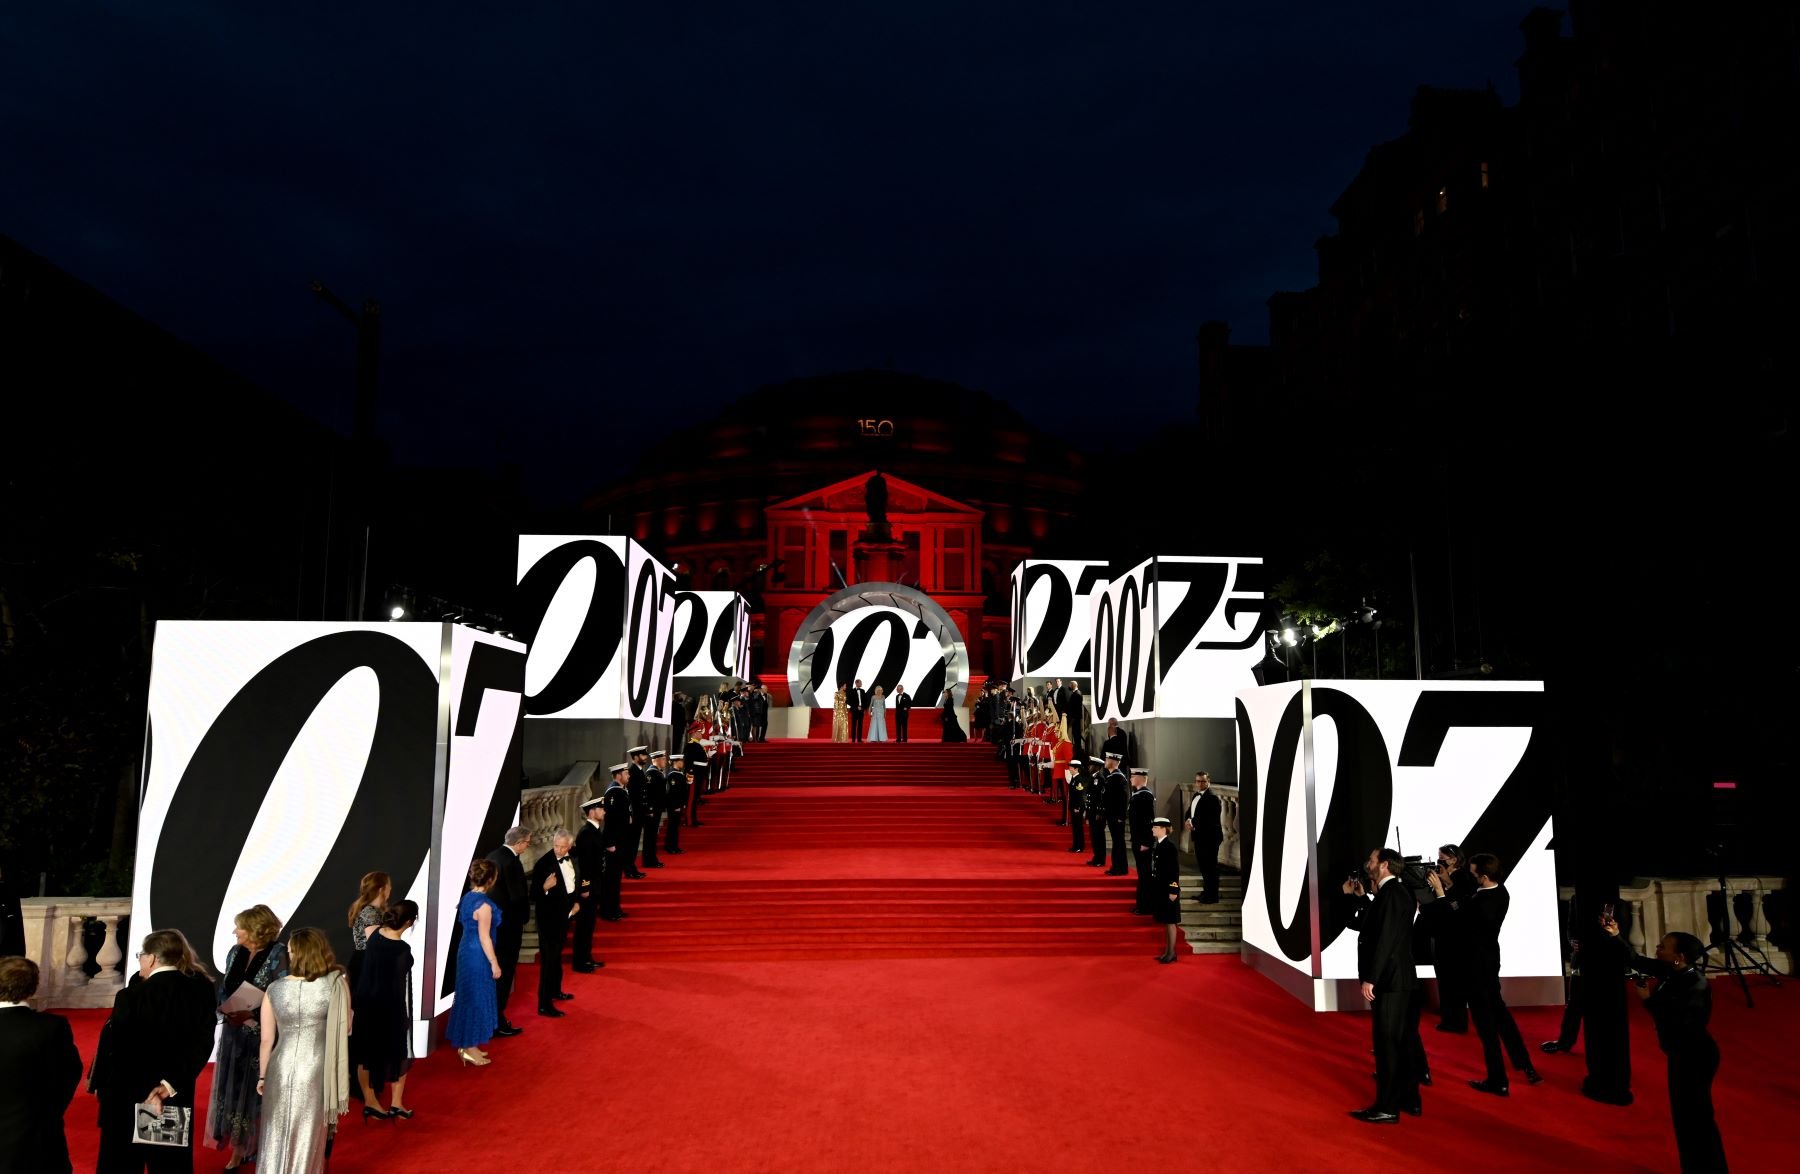 The 'No Time to Die' red carpet world premiere in London, England